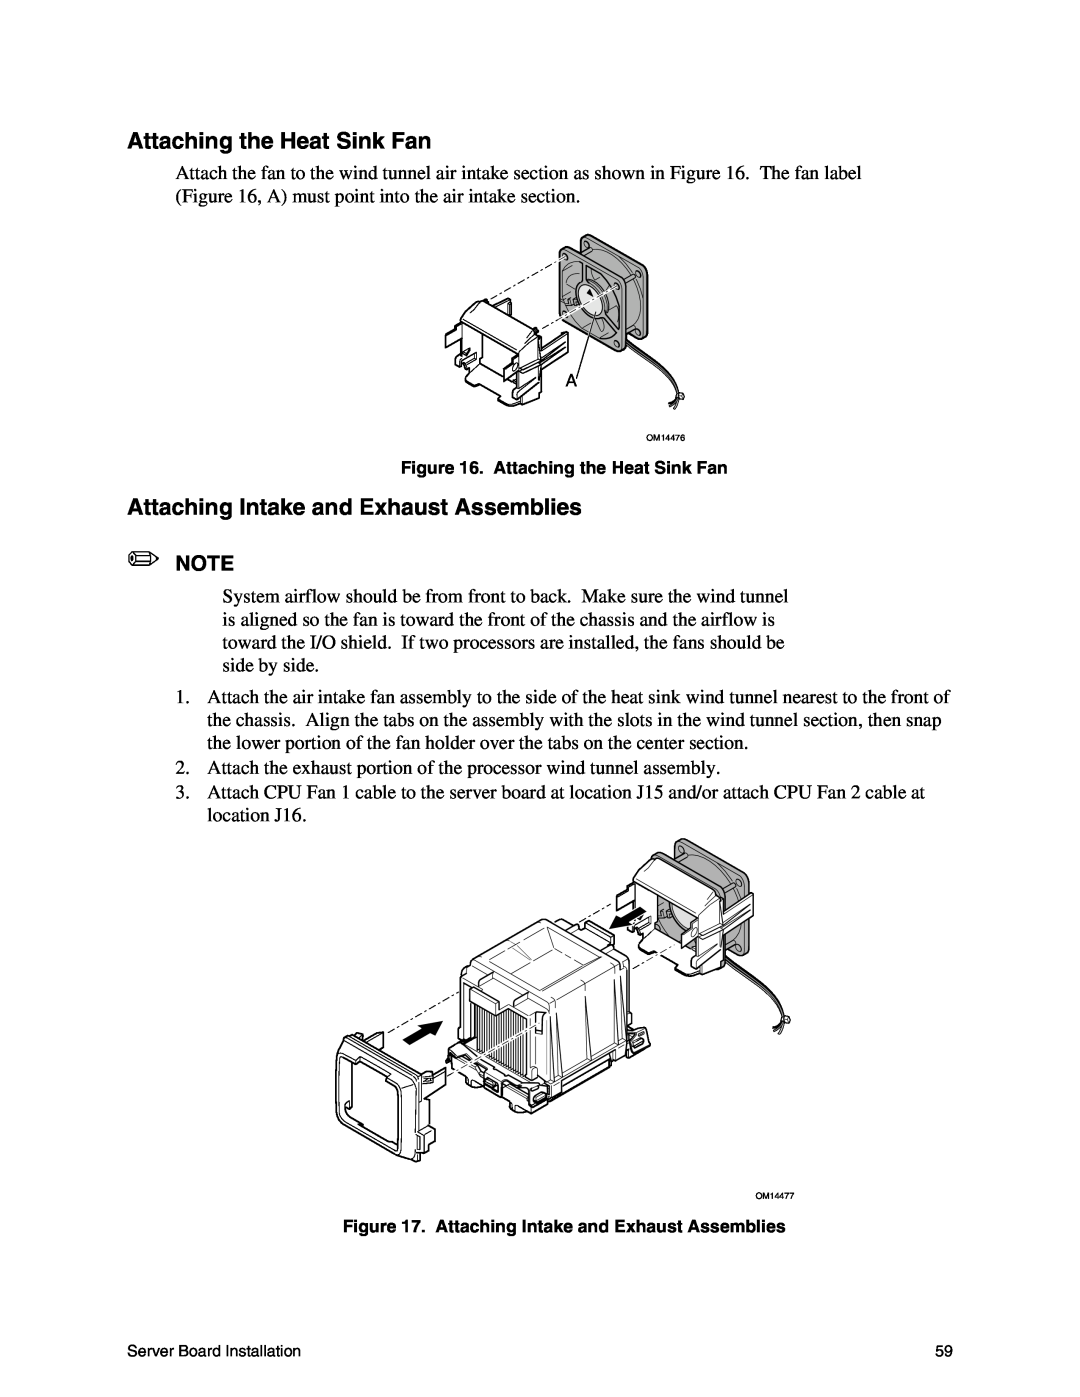 Intel SE7500CW2 manual Attaching the Heat Sink Fan, Attaching Intake and Exhaust Assemblies 